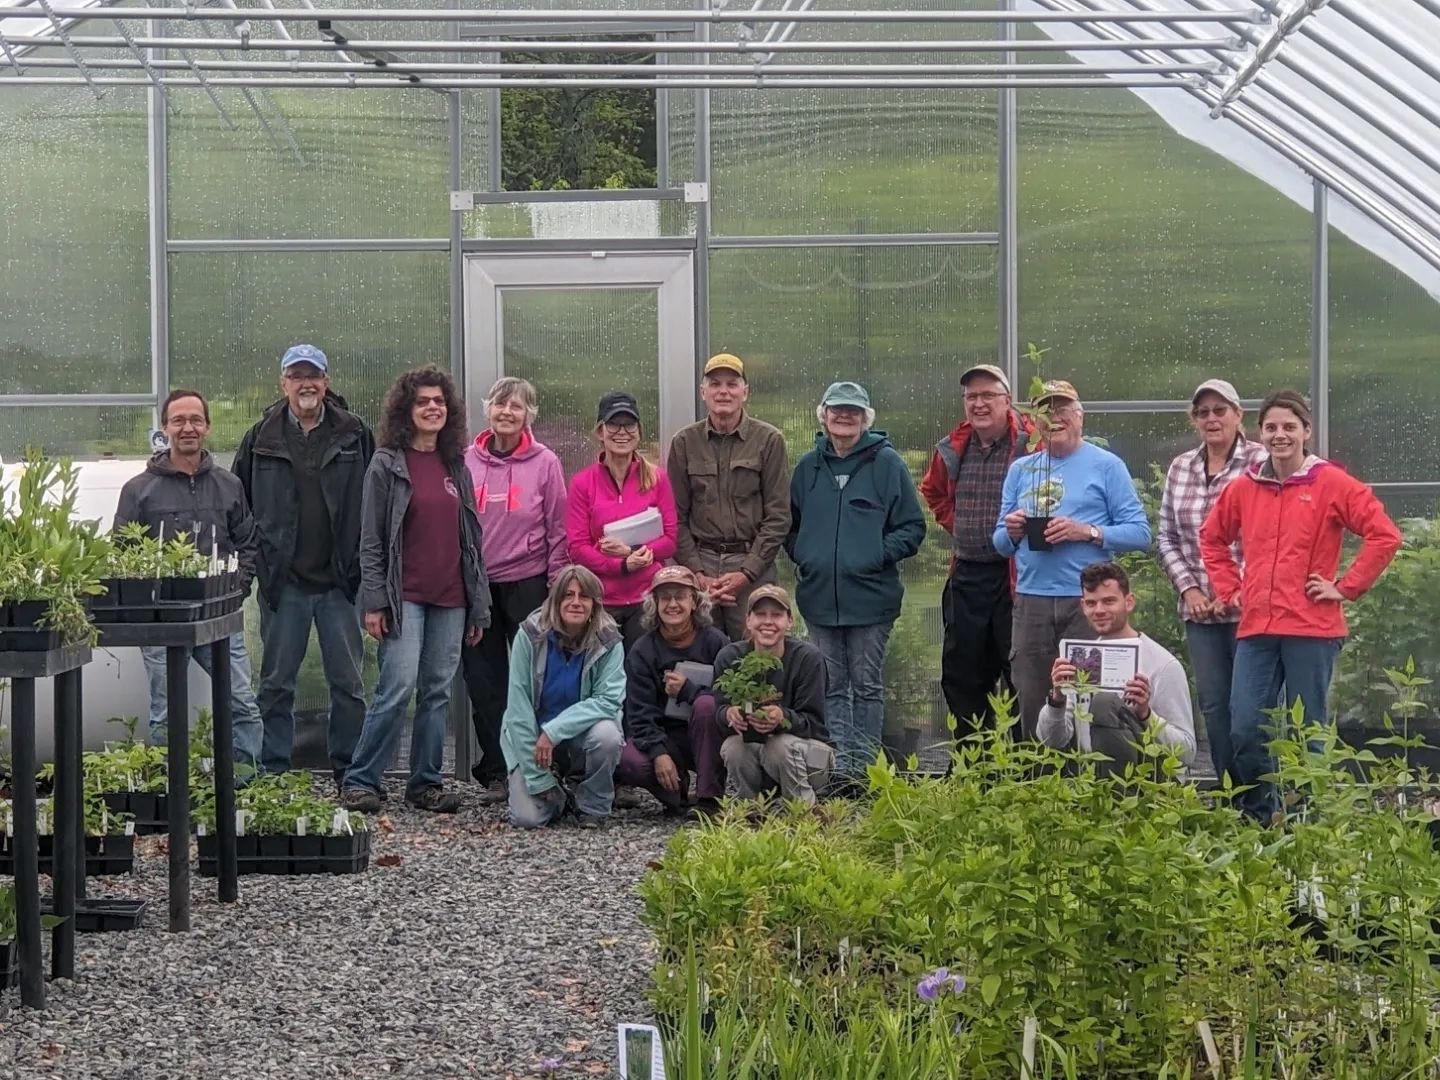 Thank you to everyone who came out to the Native Plant Sale this weekend!! And thank you to the wonderful volunteers who helped make this such a fun and successful event. We had a great time and can't wait to see you all again soon!

Learn more about